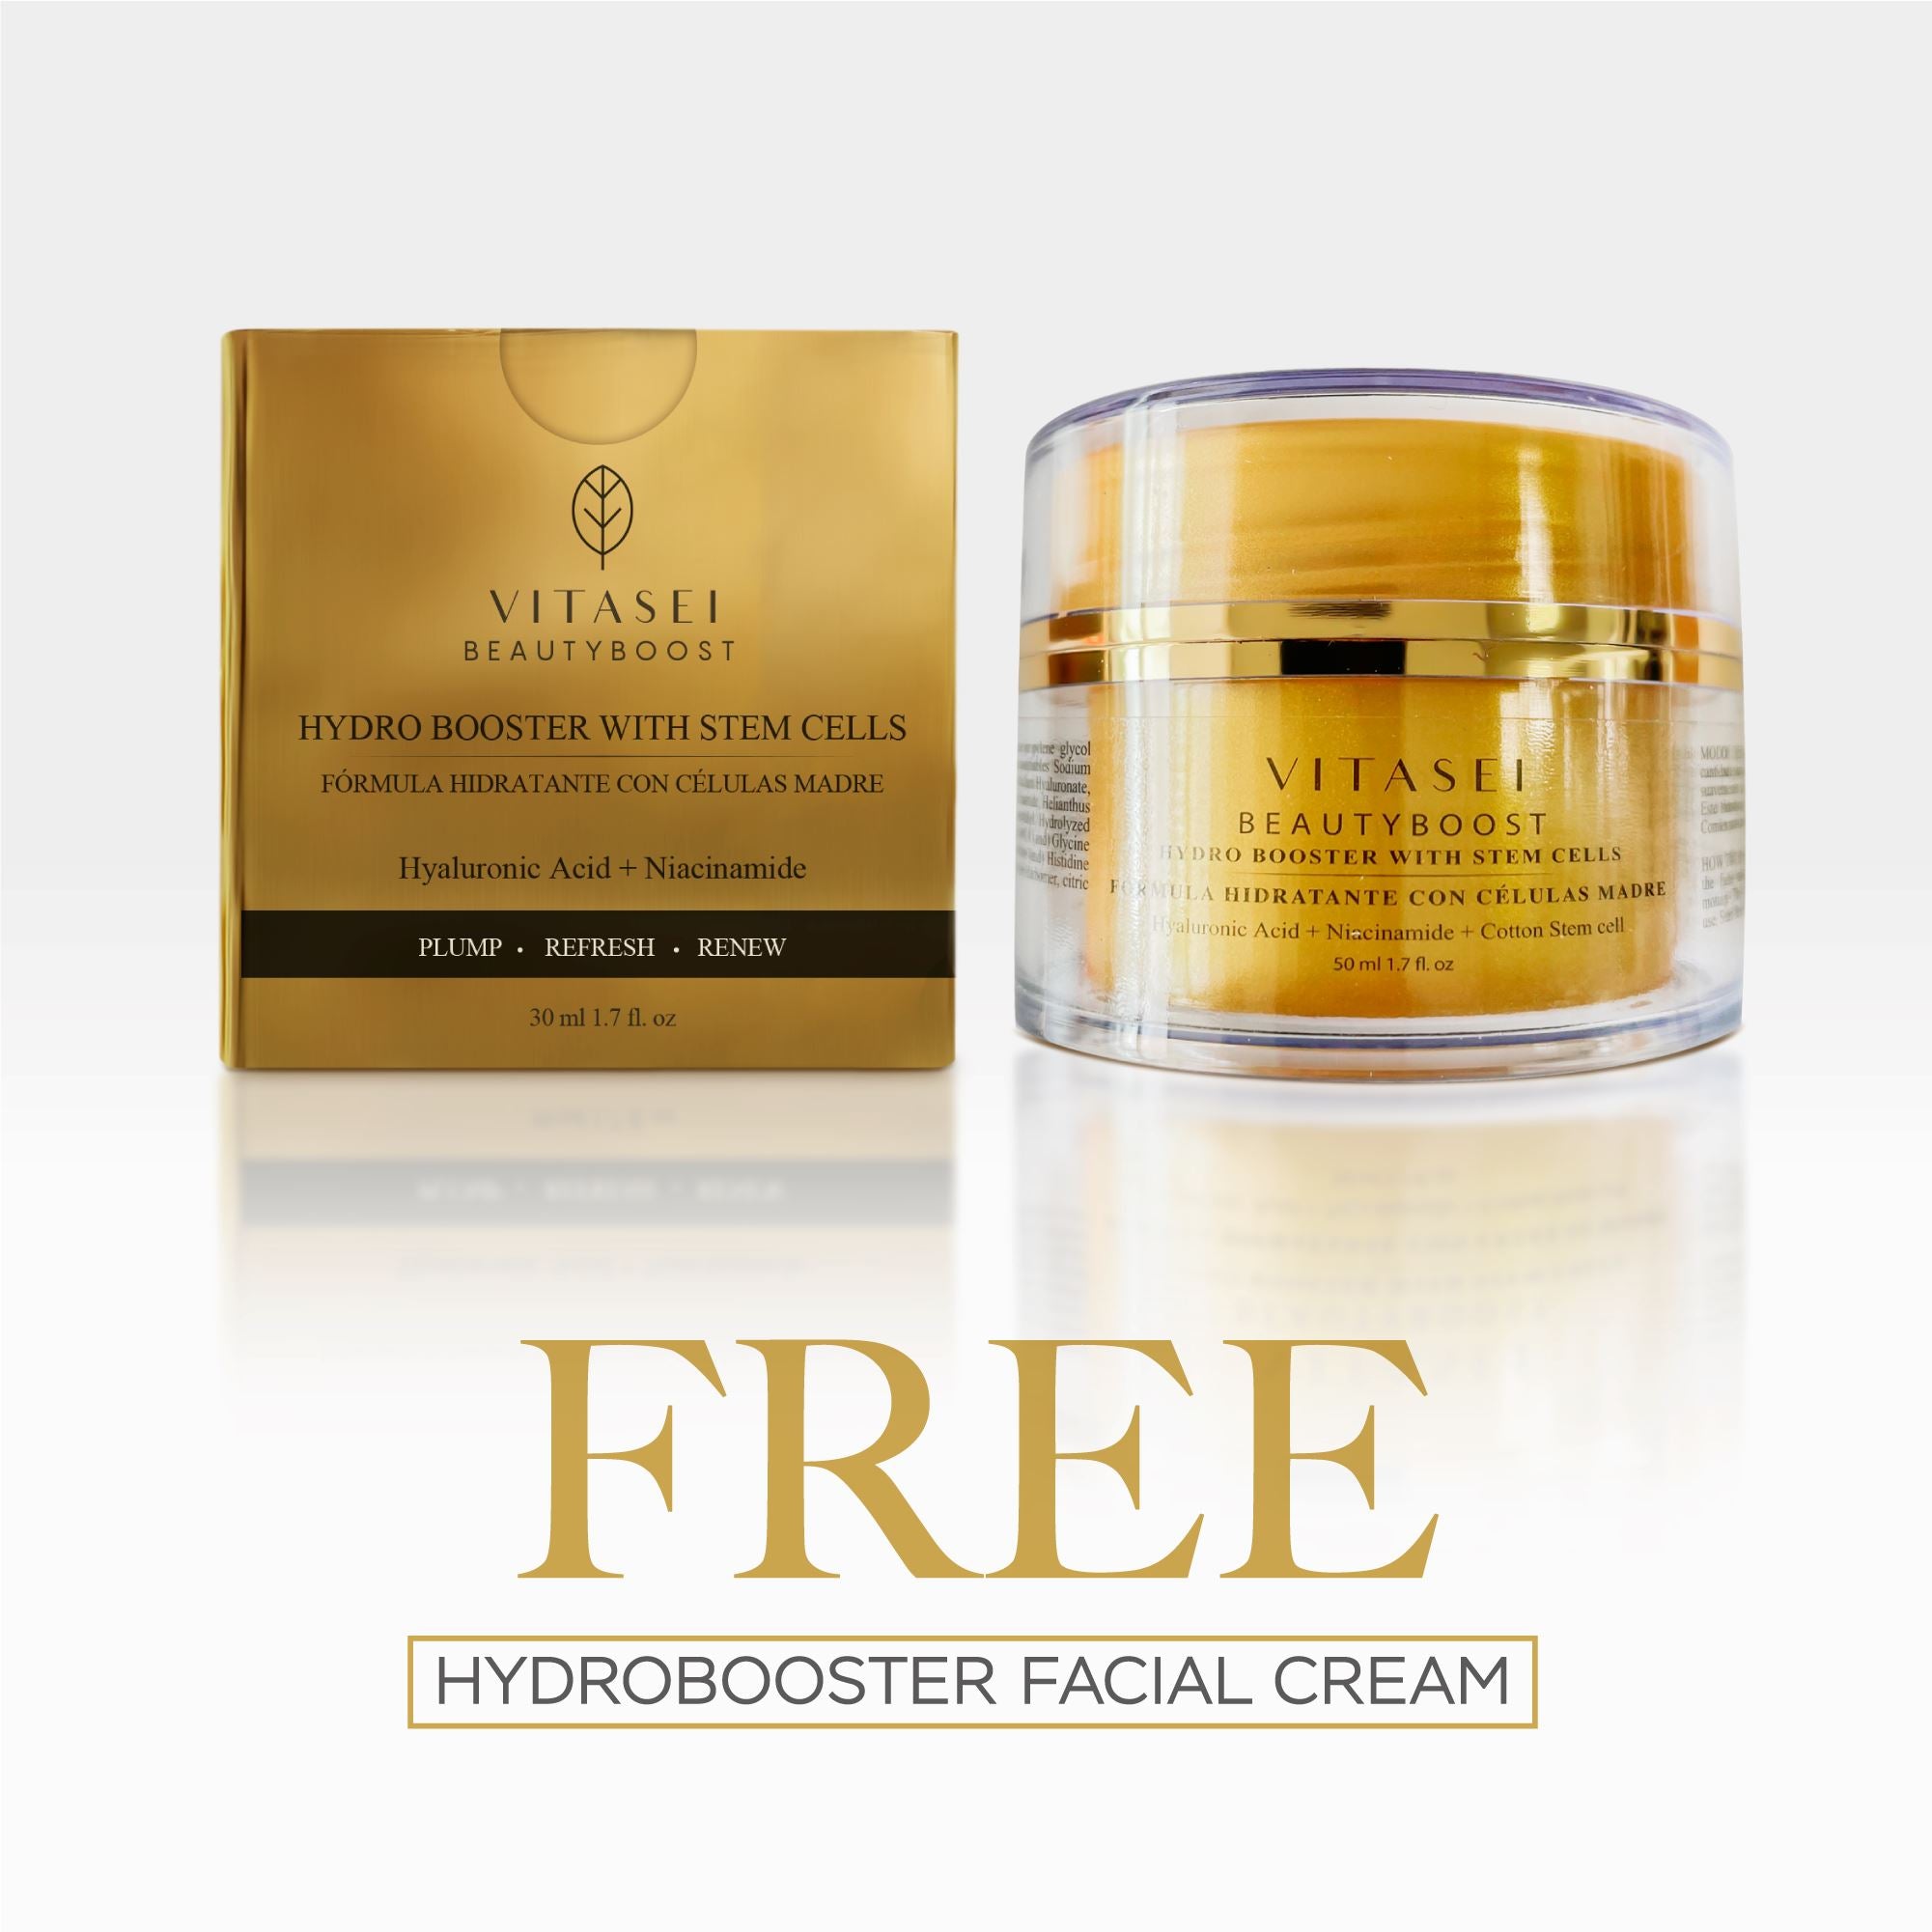 KIT DAY AND NIGHT FACIAL SERUM + DAY AND NIGHT EYE CONTOUR AND GET 1 HYDROBOOSTER FREE